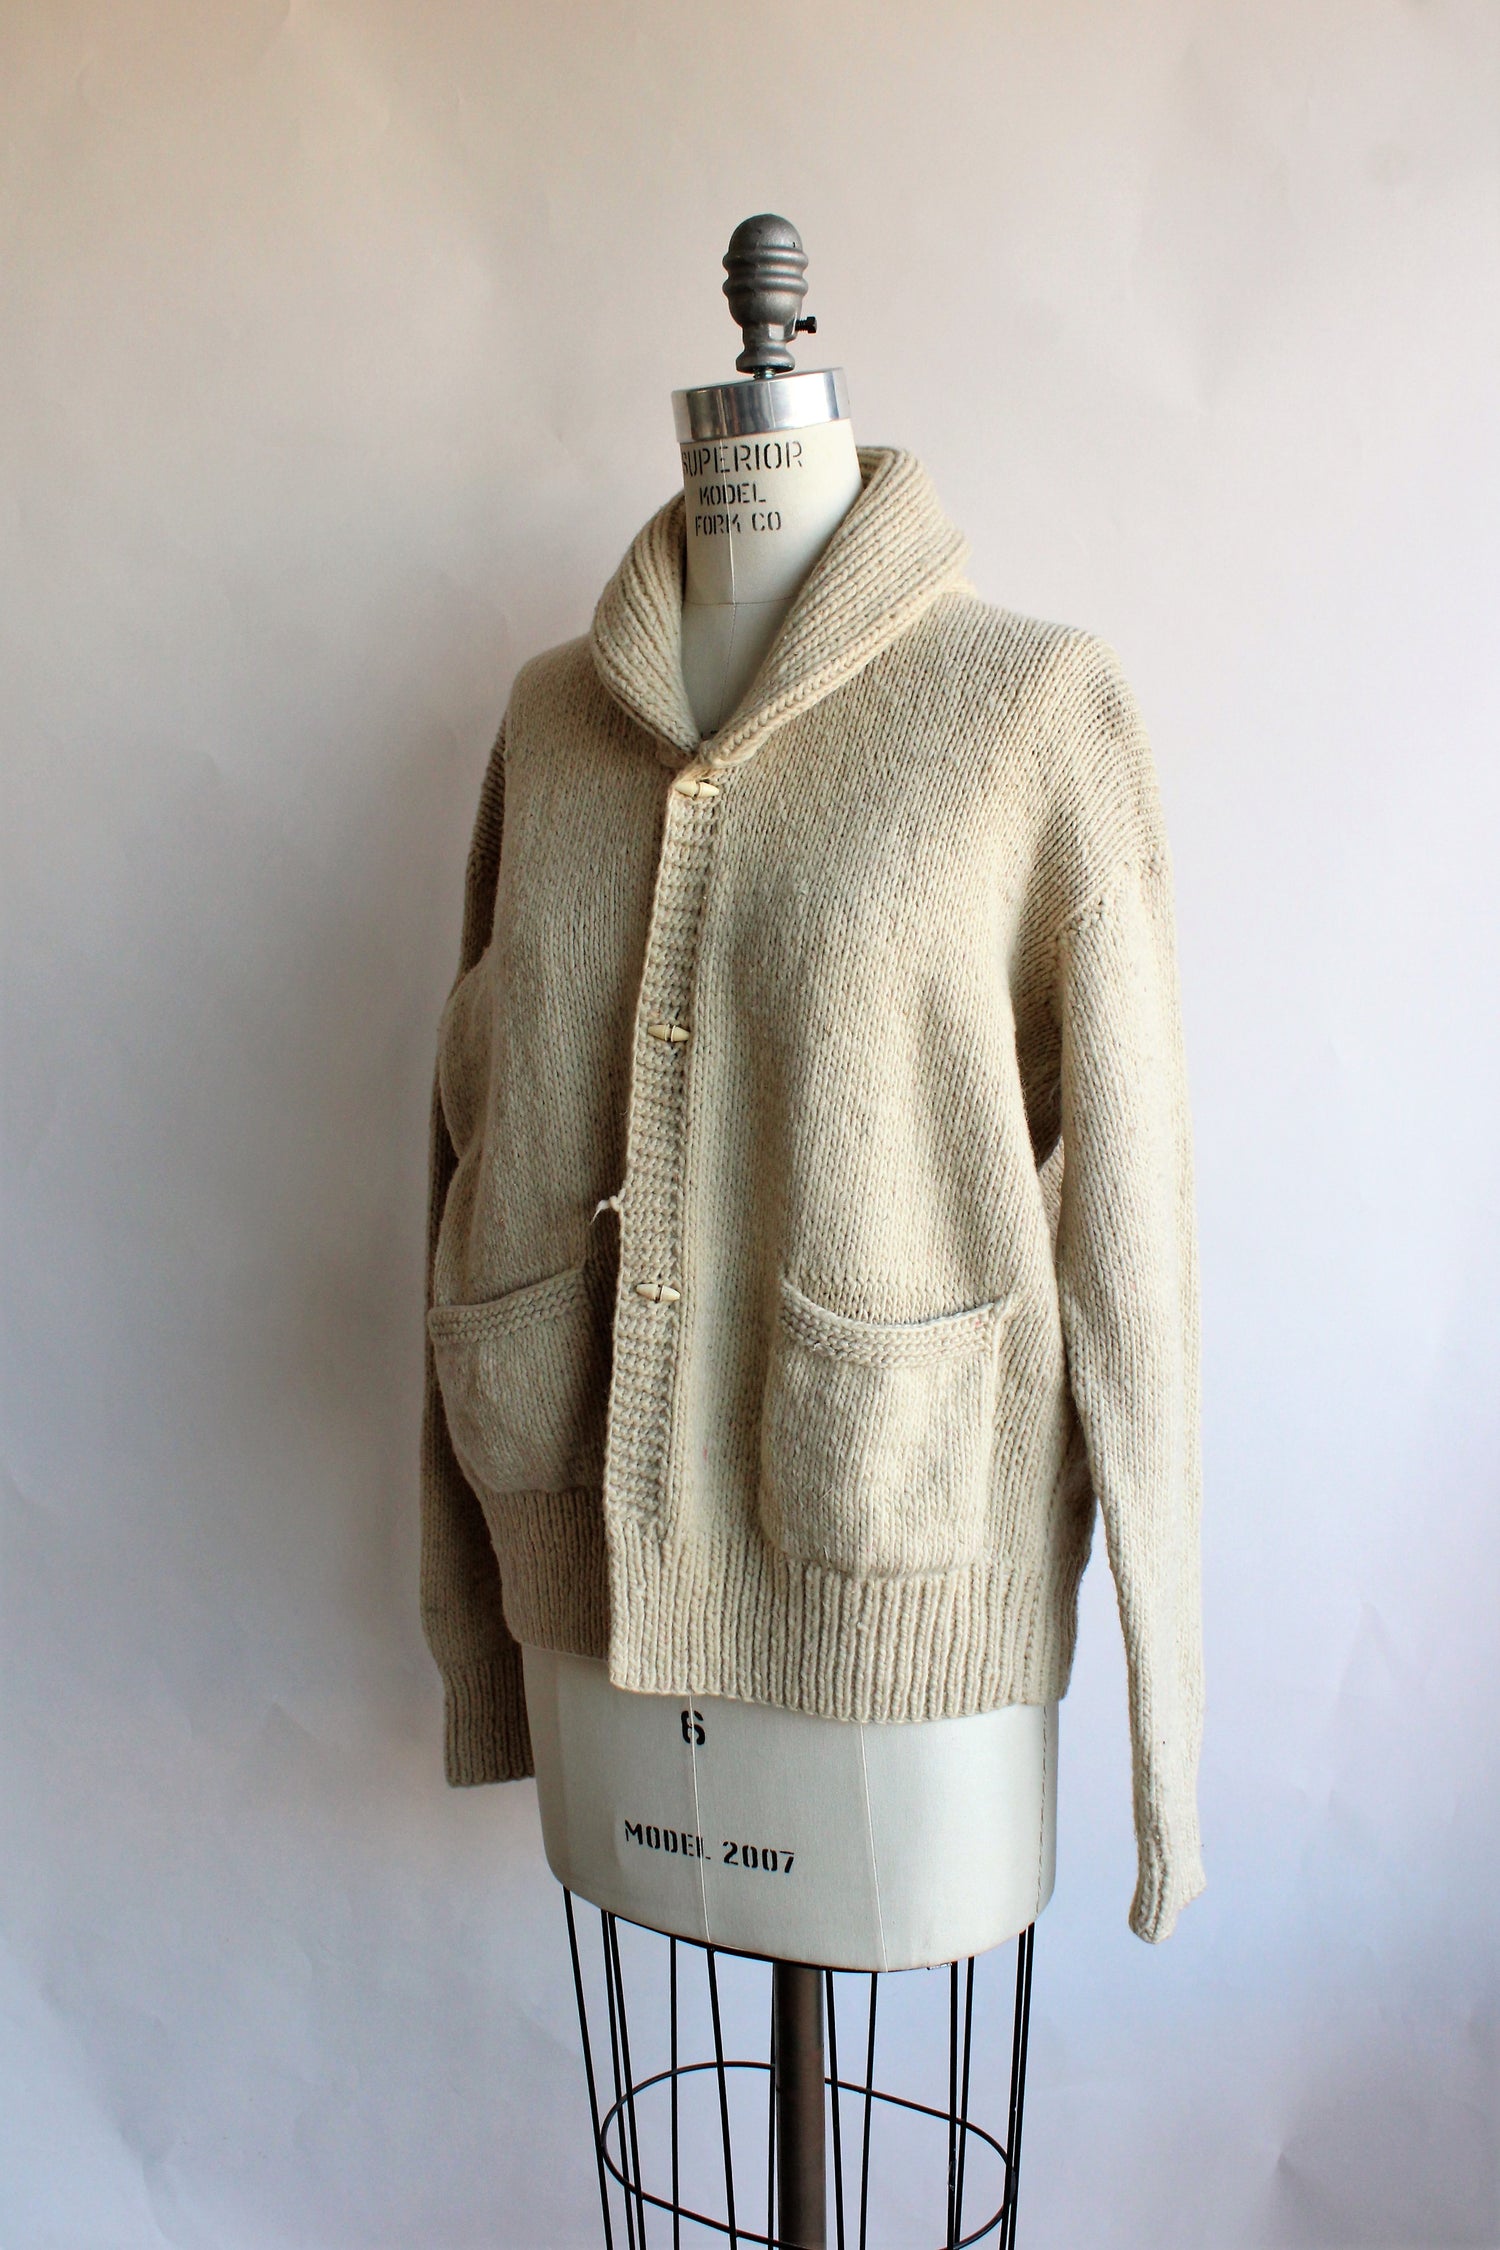 Vintage 1950s Ivory Wool Cardigan With Pockets